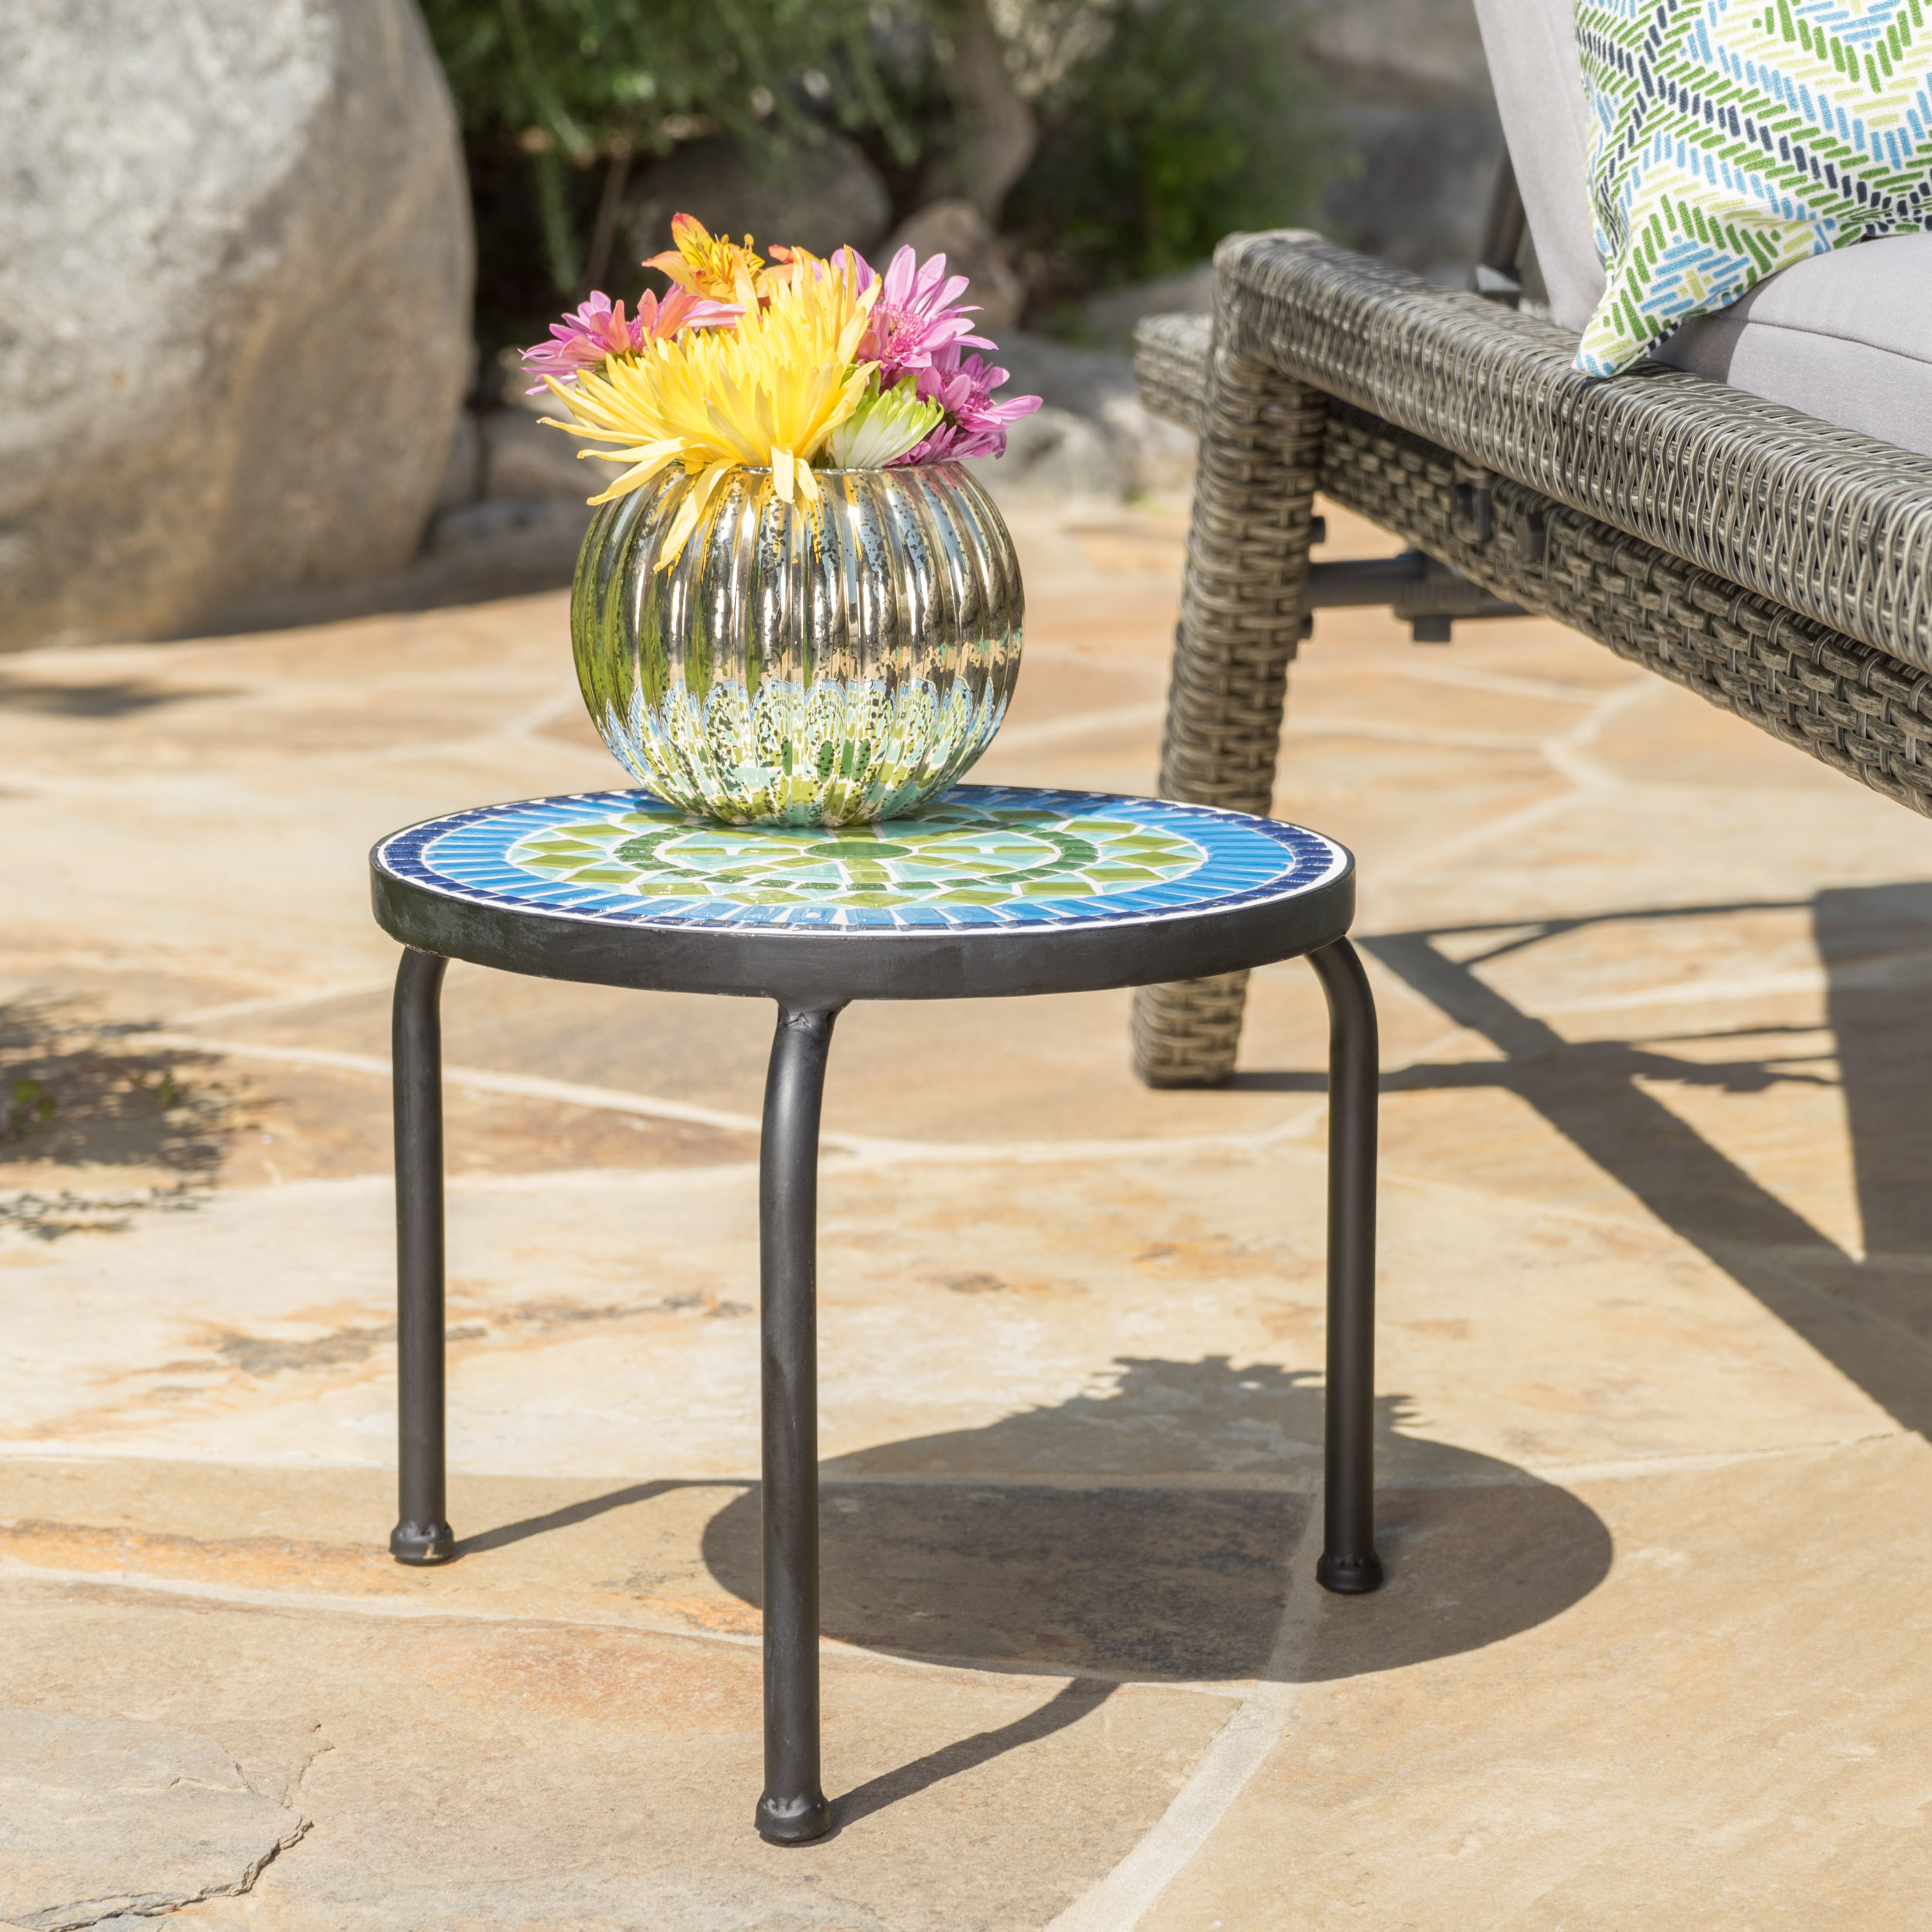 Noble House Martina Outdoor Ceramic Tile Side Table with Iron Frame, Blue and Green - image 2 of 7